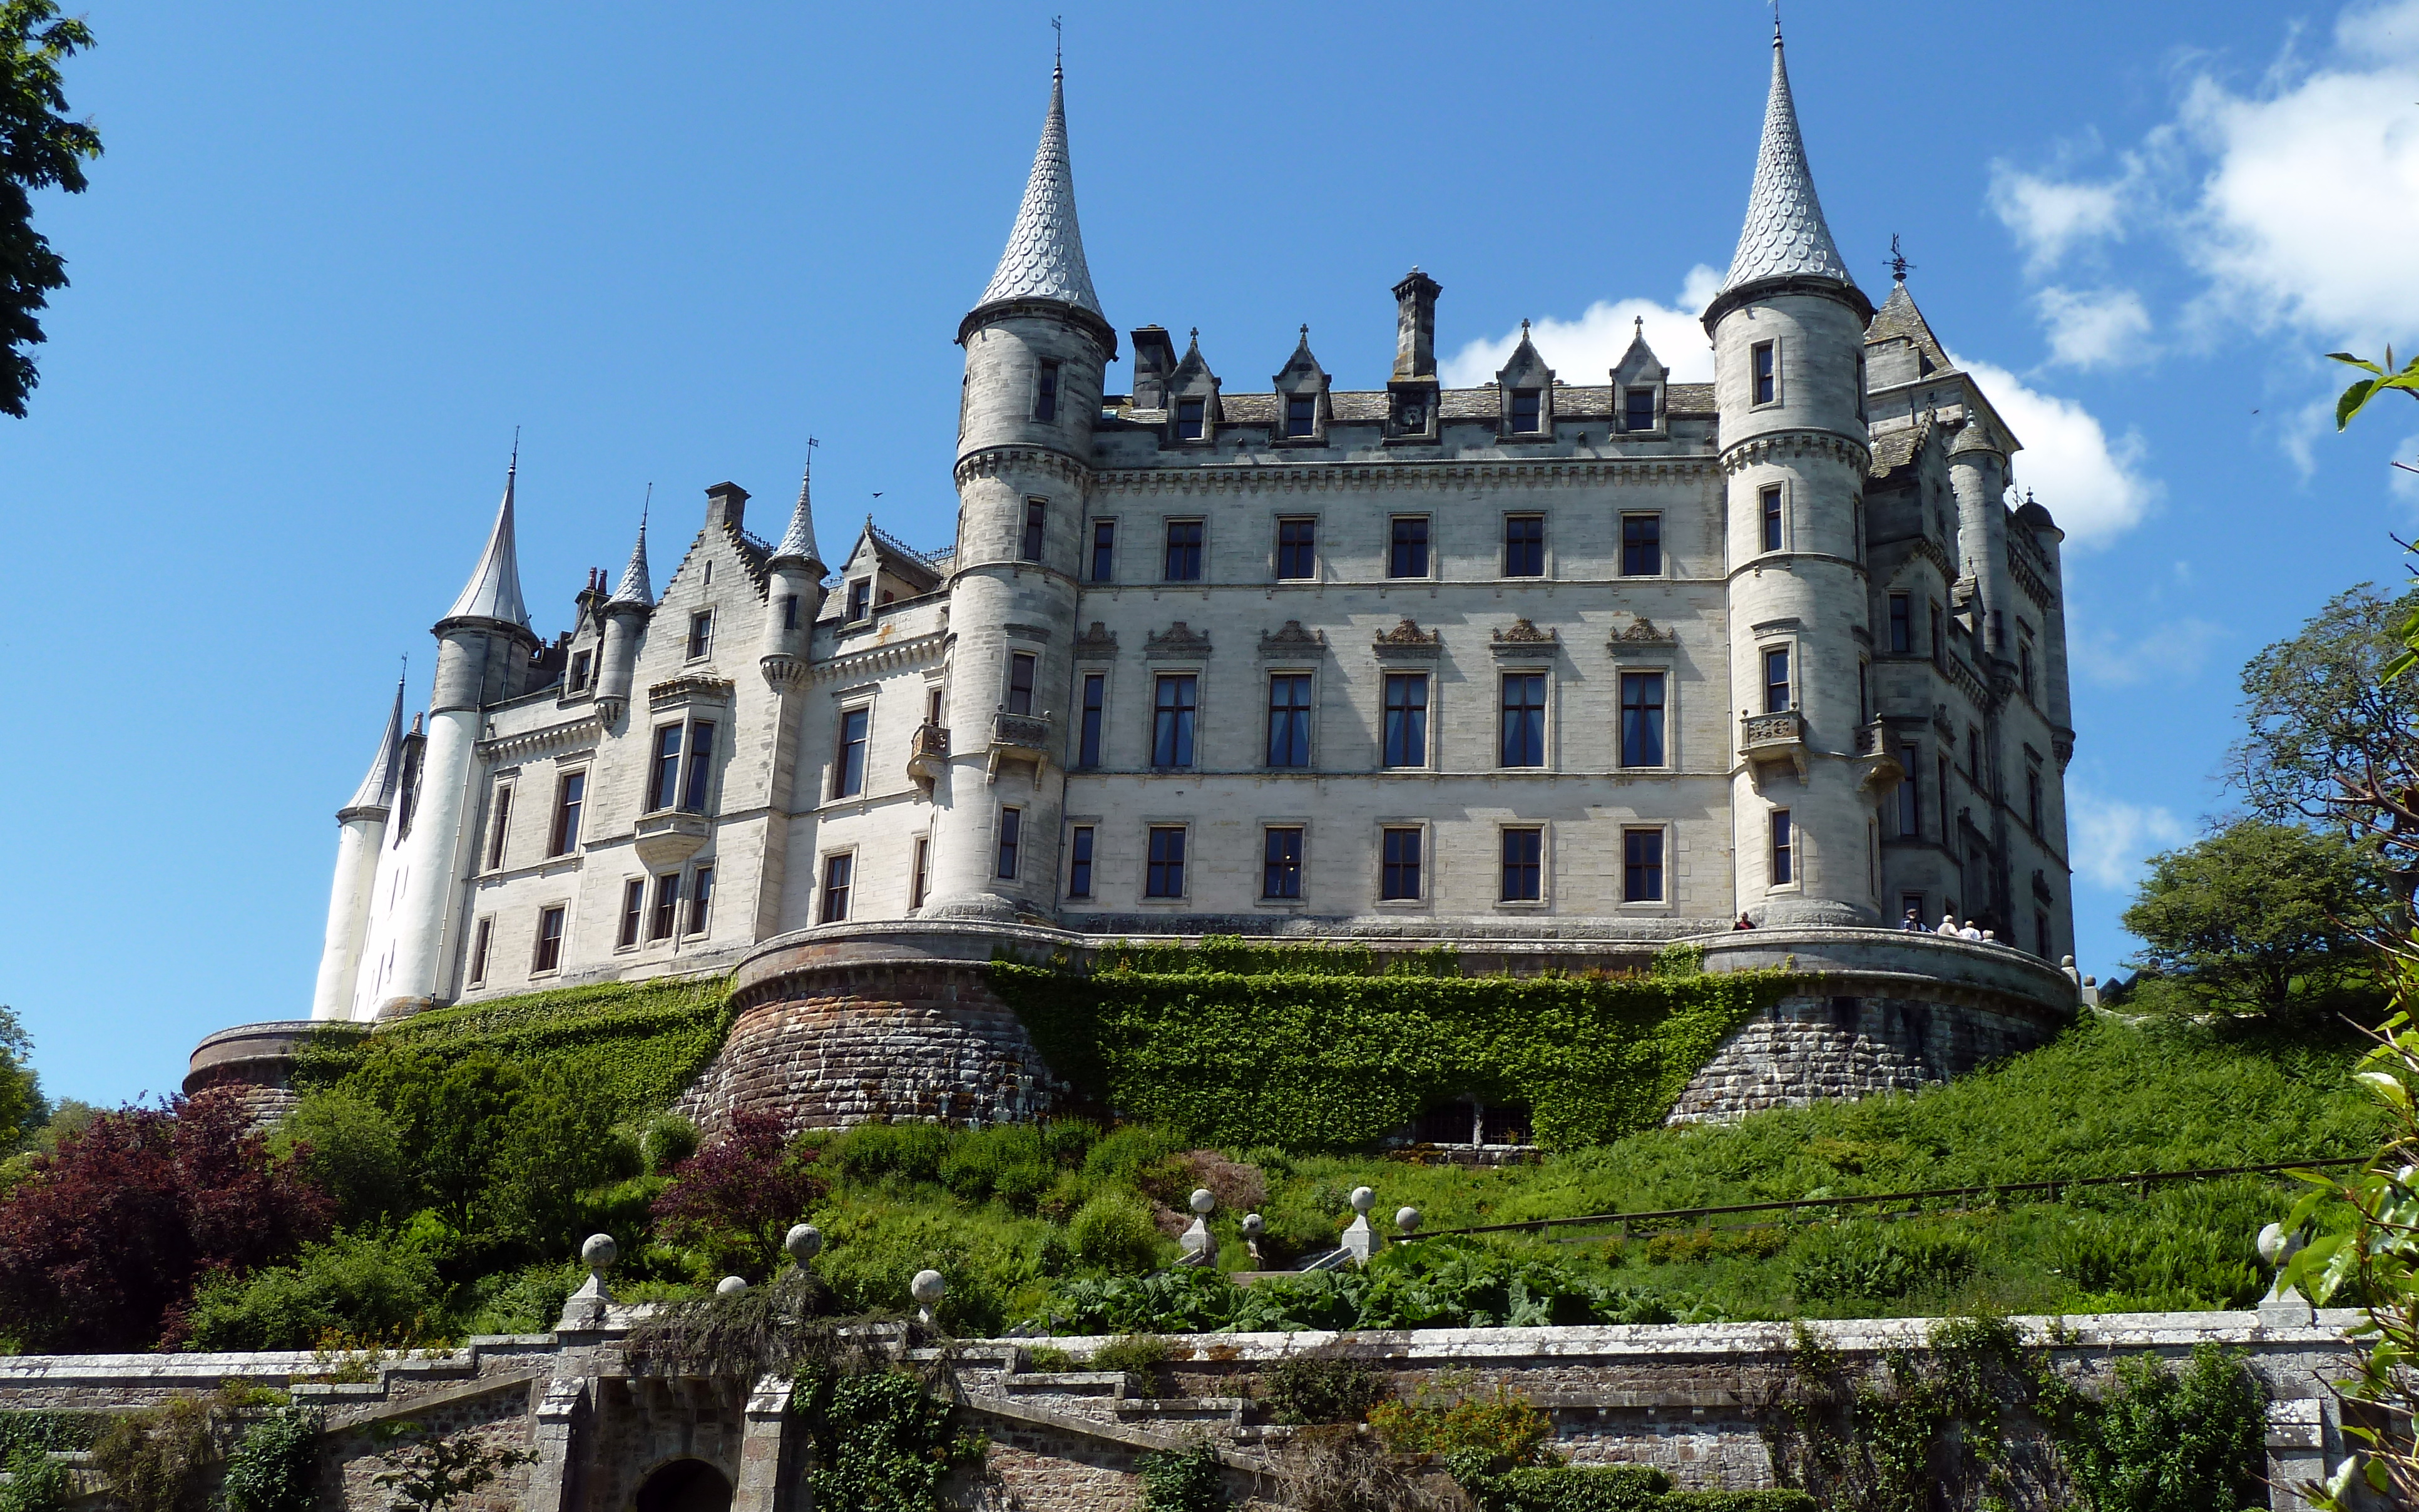 Dunrobin Castle looking up from the gardens. (2011)